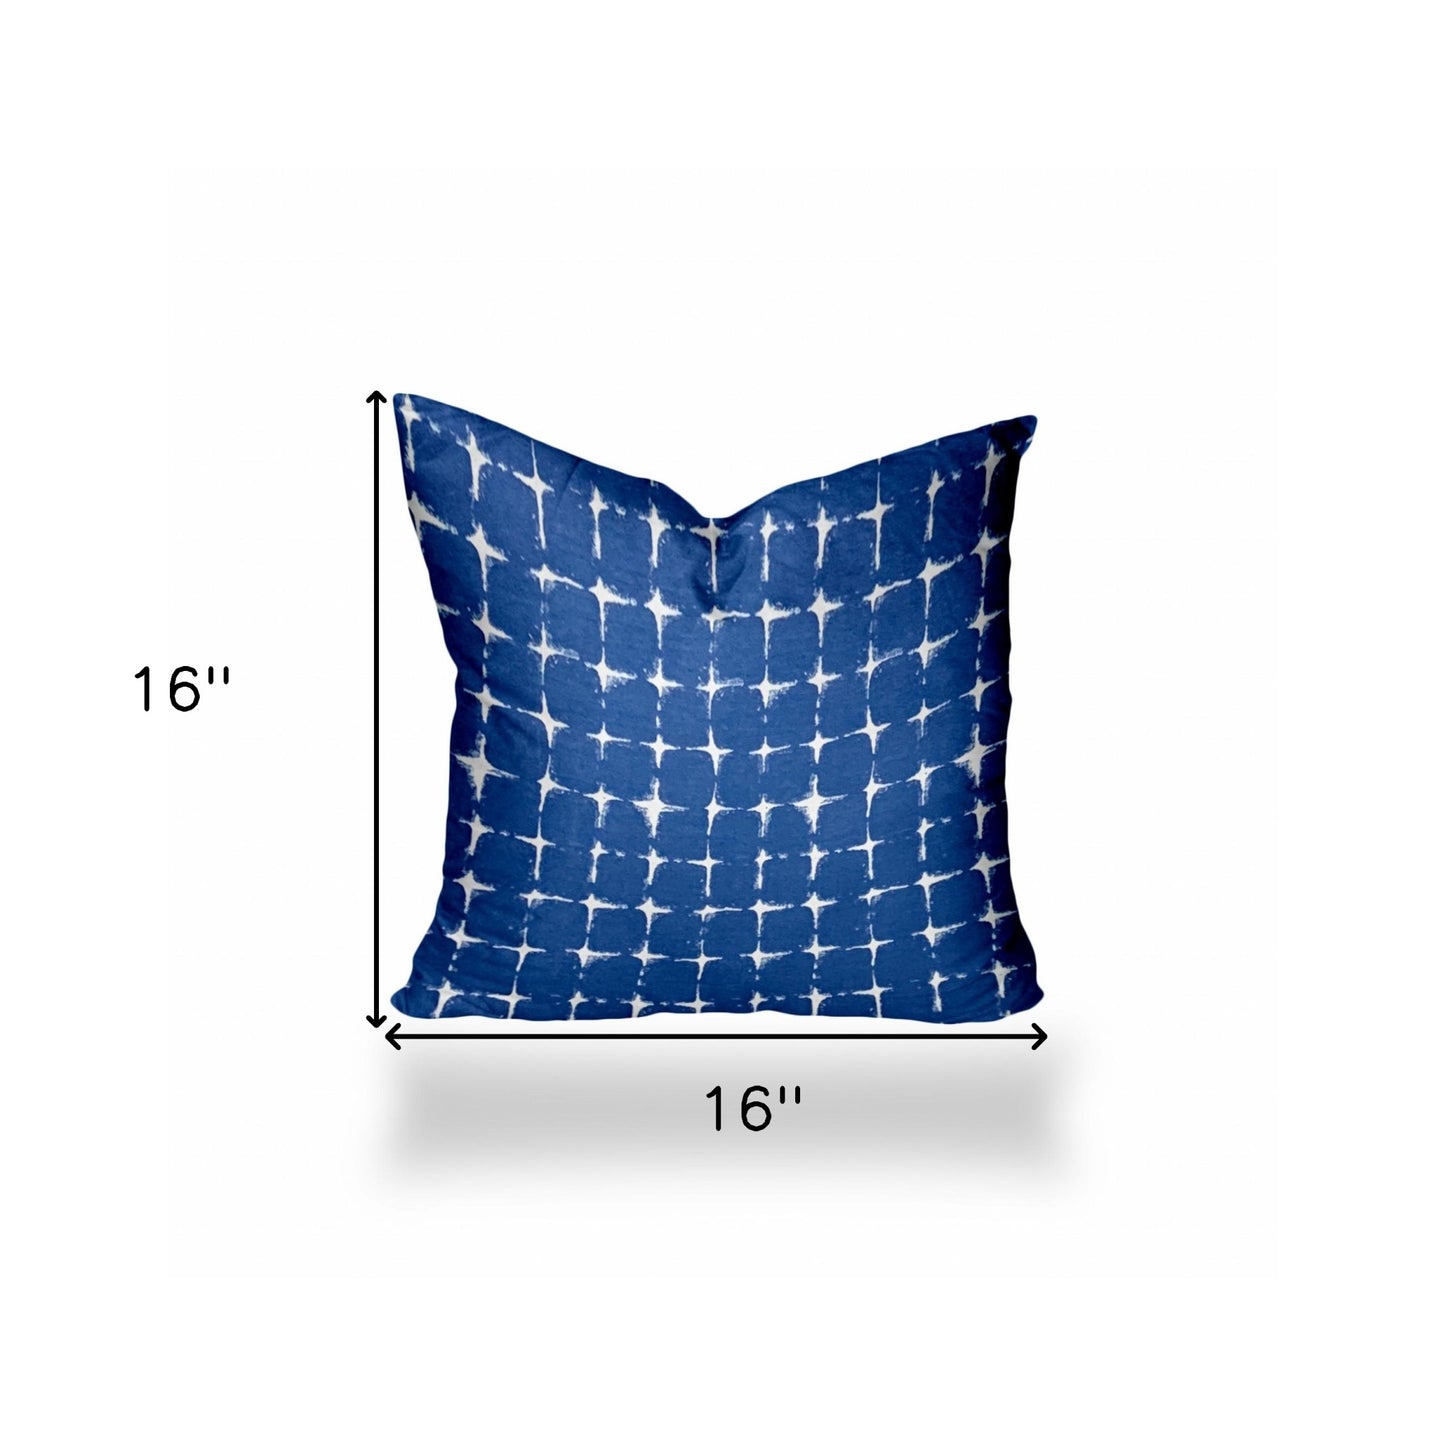 16" X 16" Blue And White Enveloped Gingham Throw Indoor Outdoor Pillow Cover